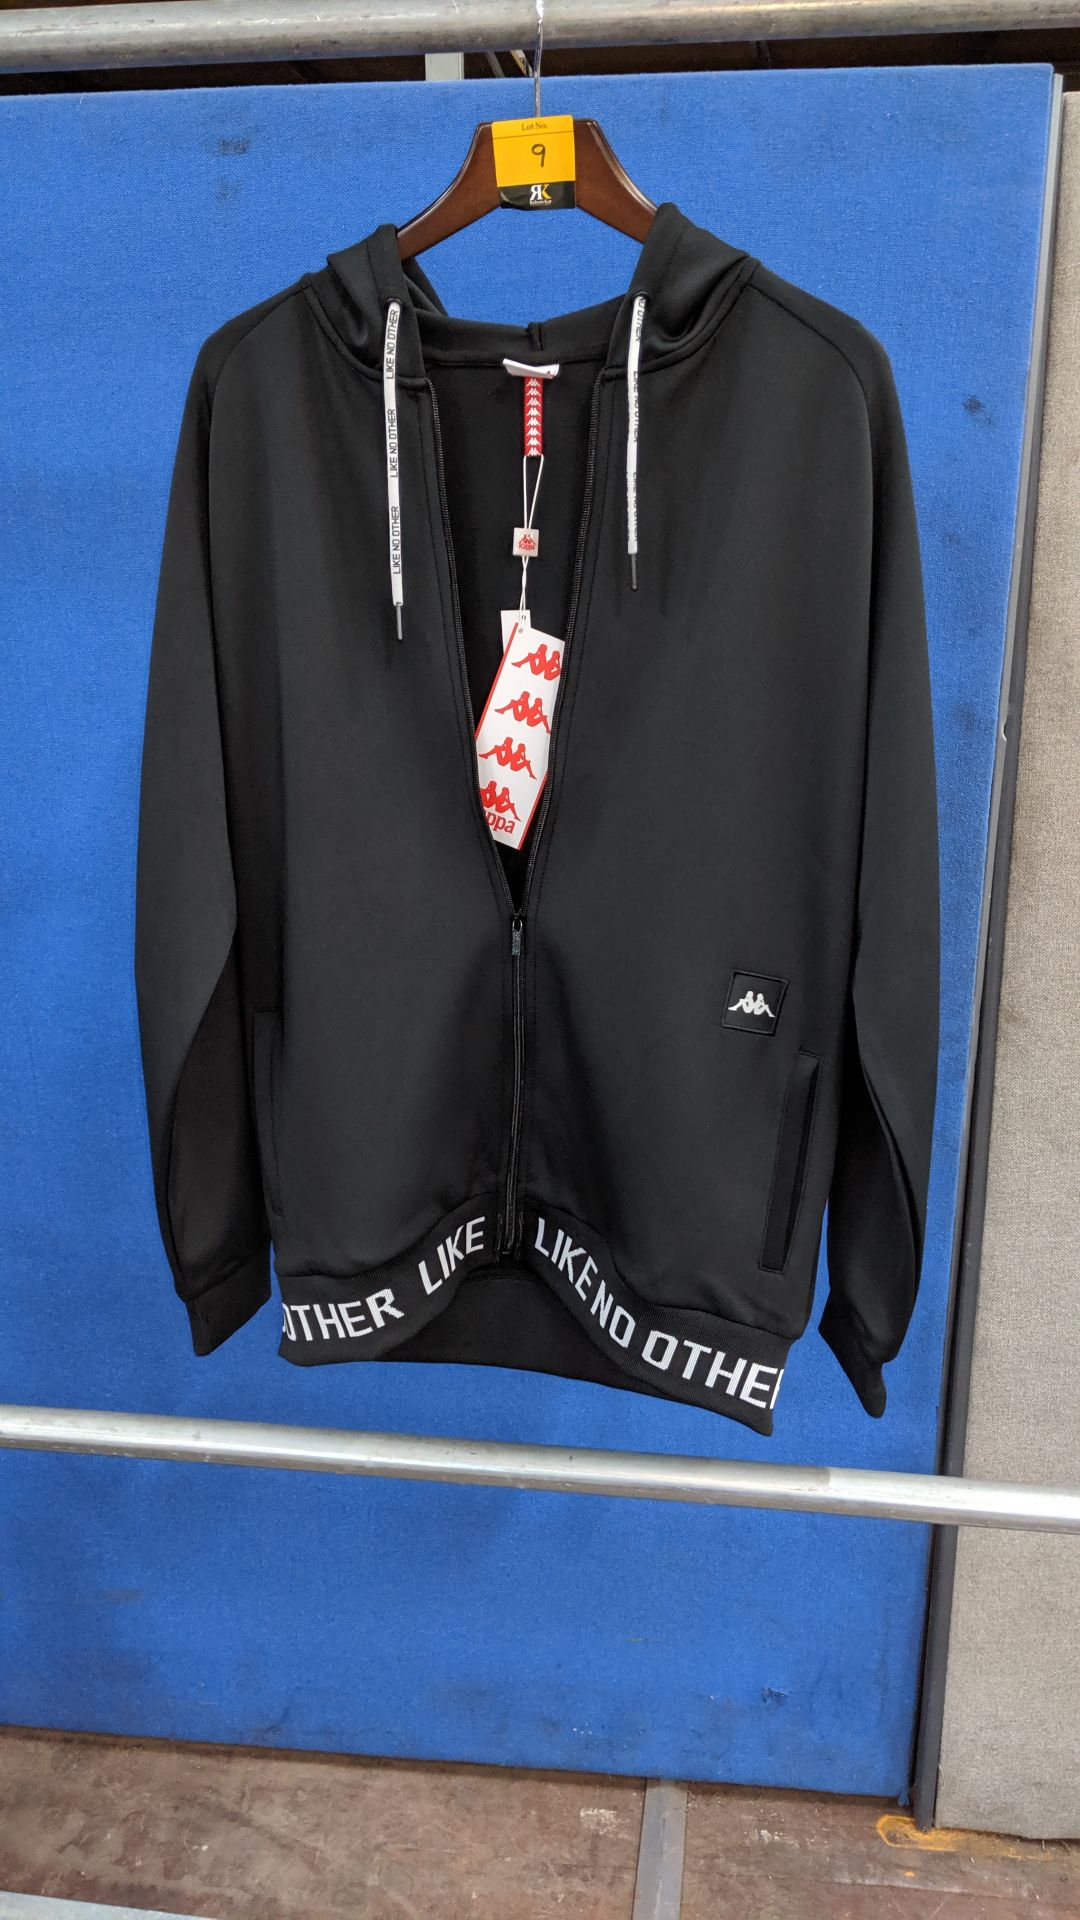 Kappa full zip hooded top size L. This is one of a number of lots being sold on behalf of the - Image 2 of 4